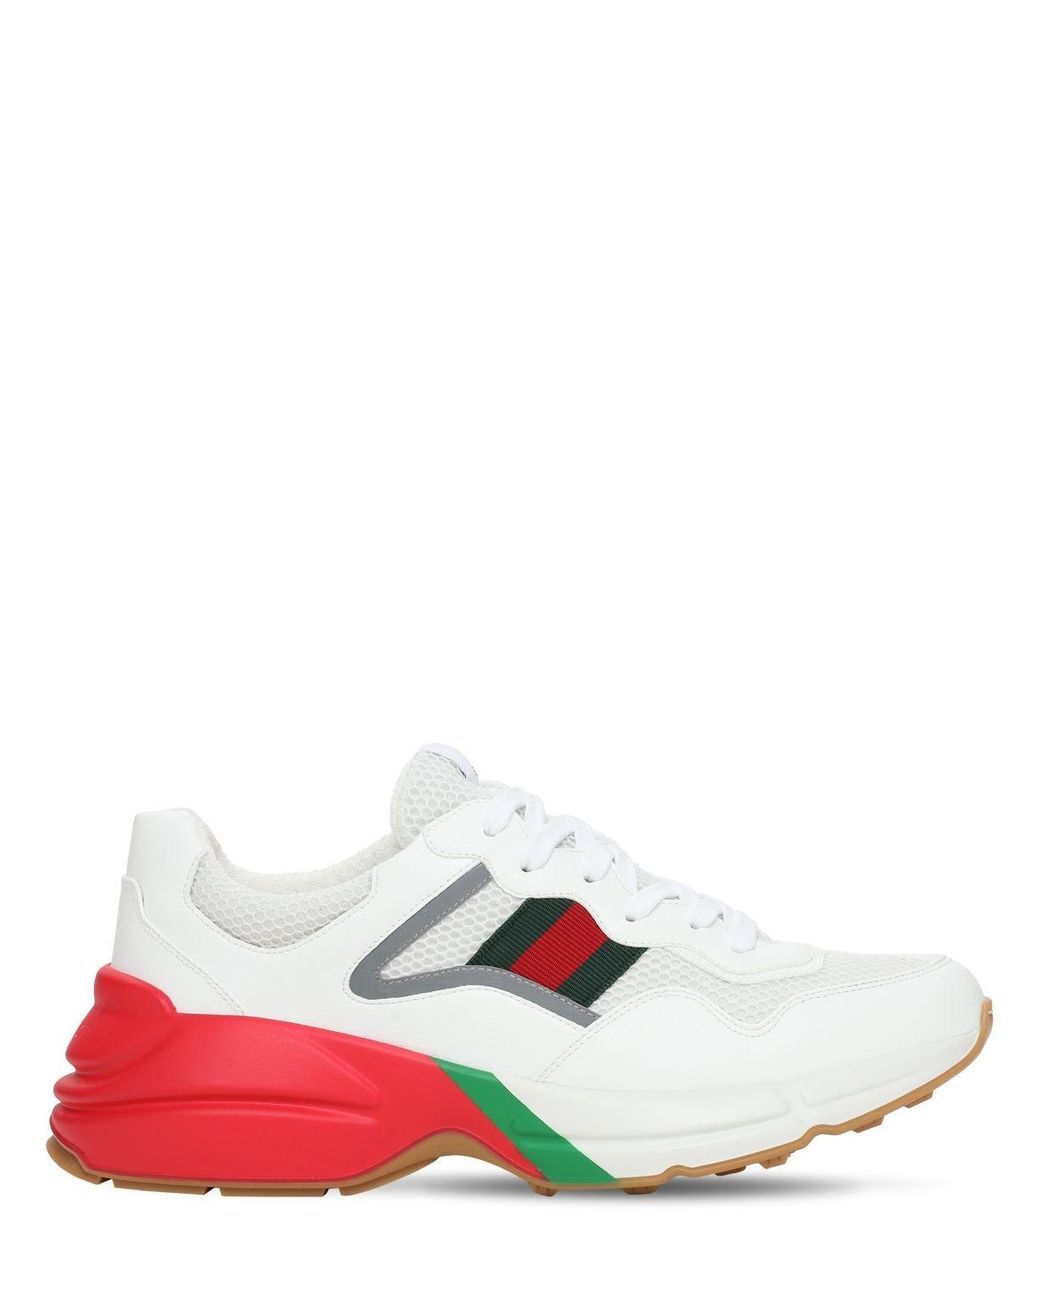 Gucci Web Rhyton Sneakers in White for Men - Lyst